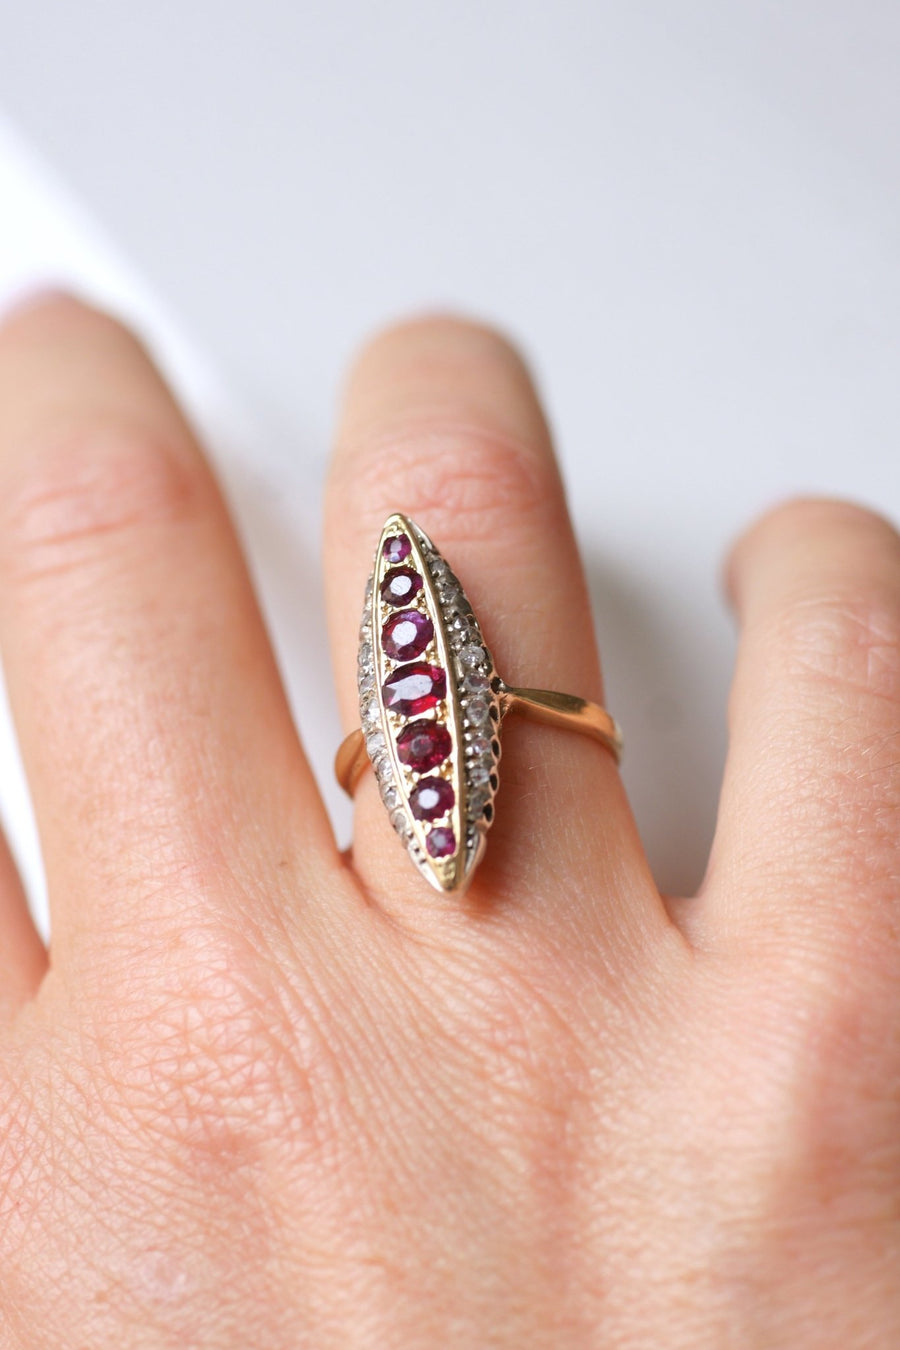 Marquise Victorian ring with diamonds and rubies in gold and silver - Galerie Pénélope